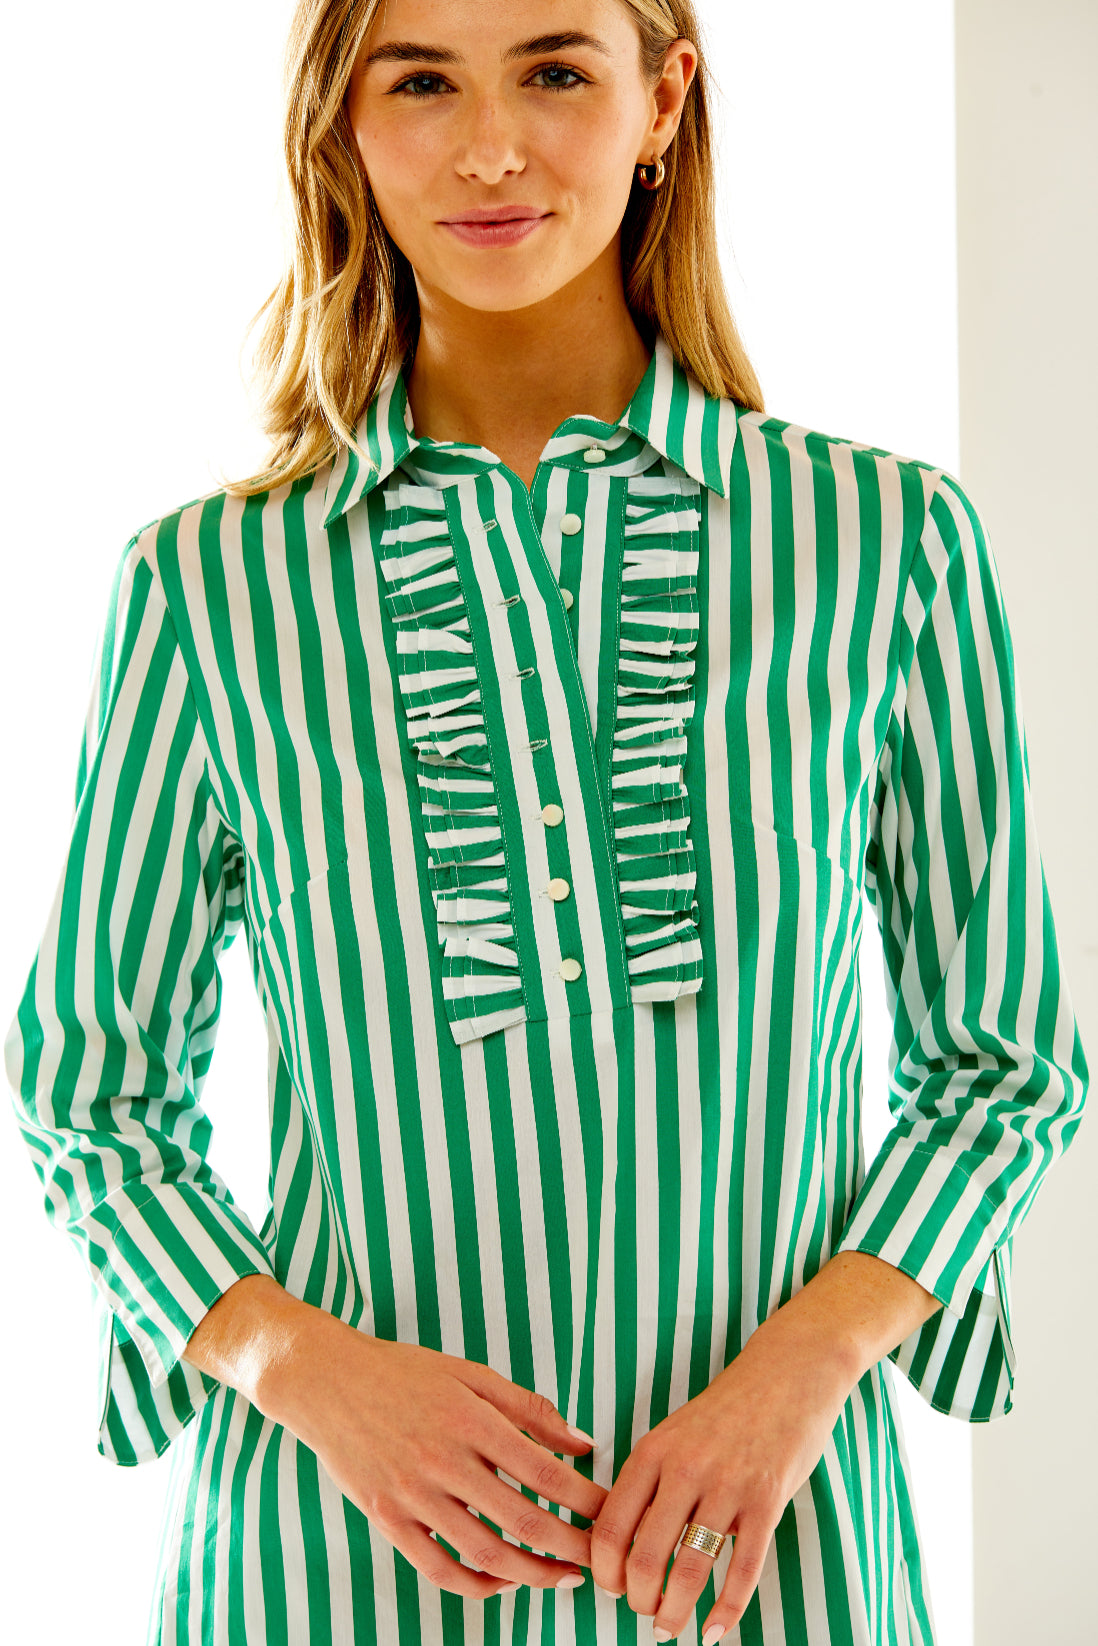 Woman in green and white striped dress